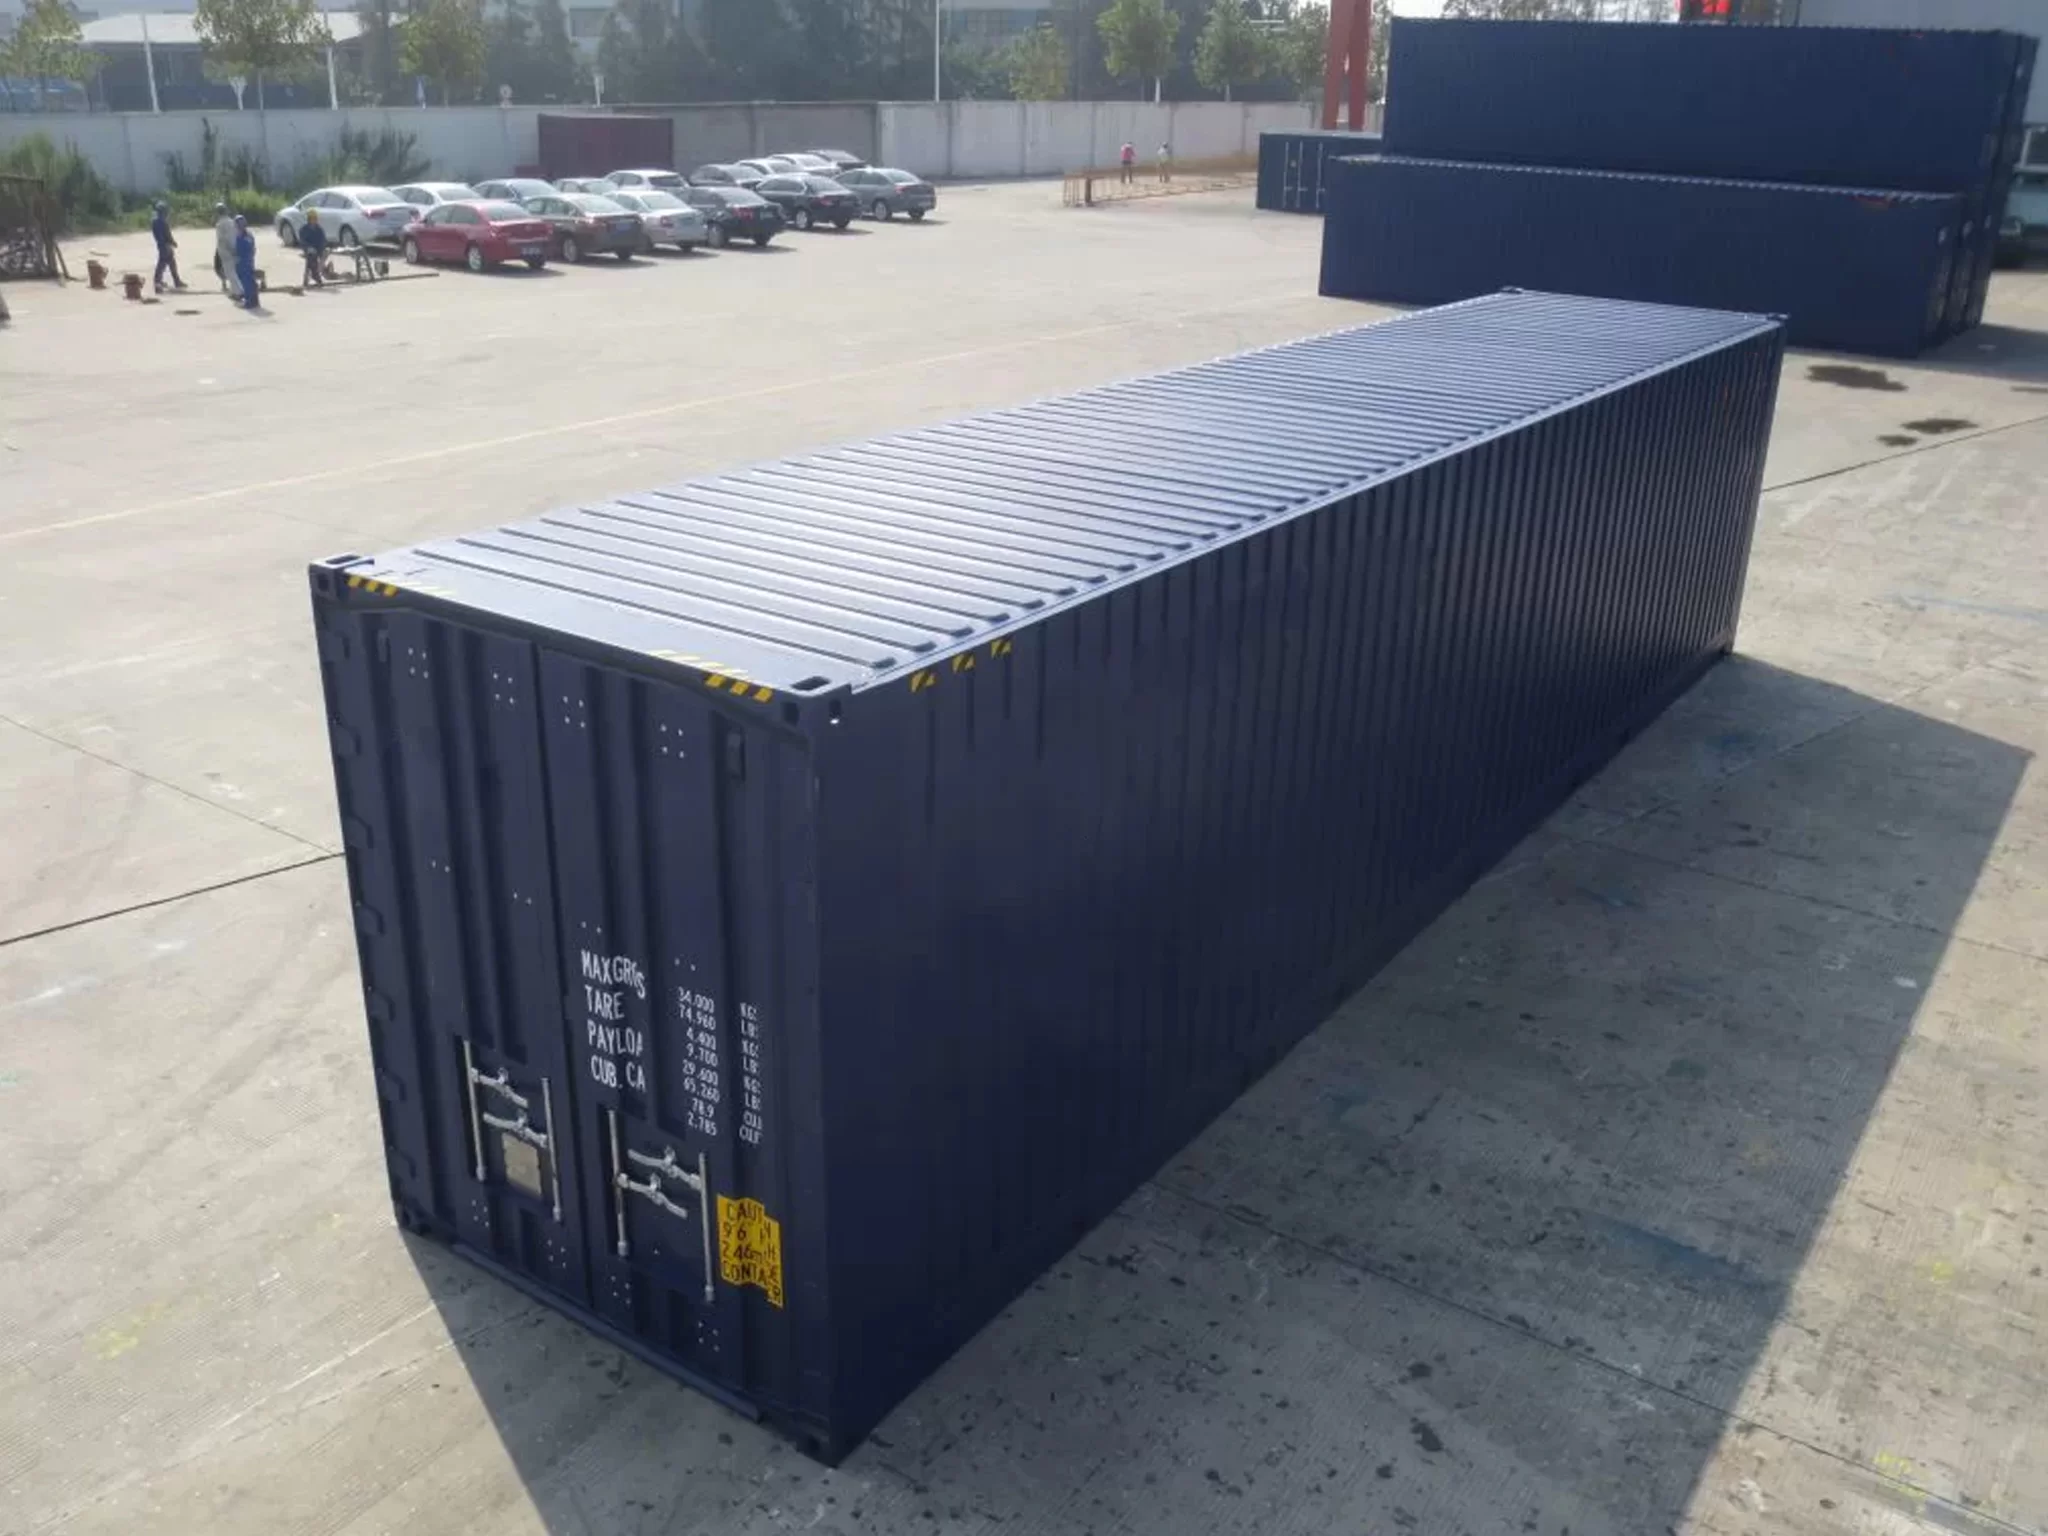 Shipping Containers For Sale in Pomona